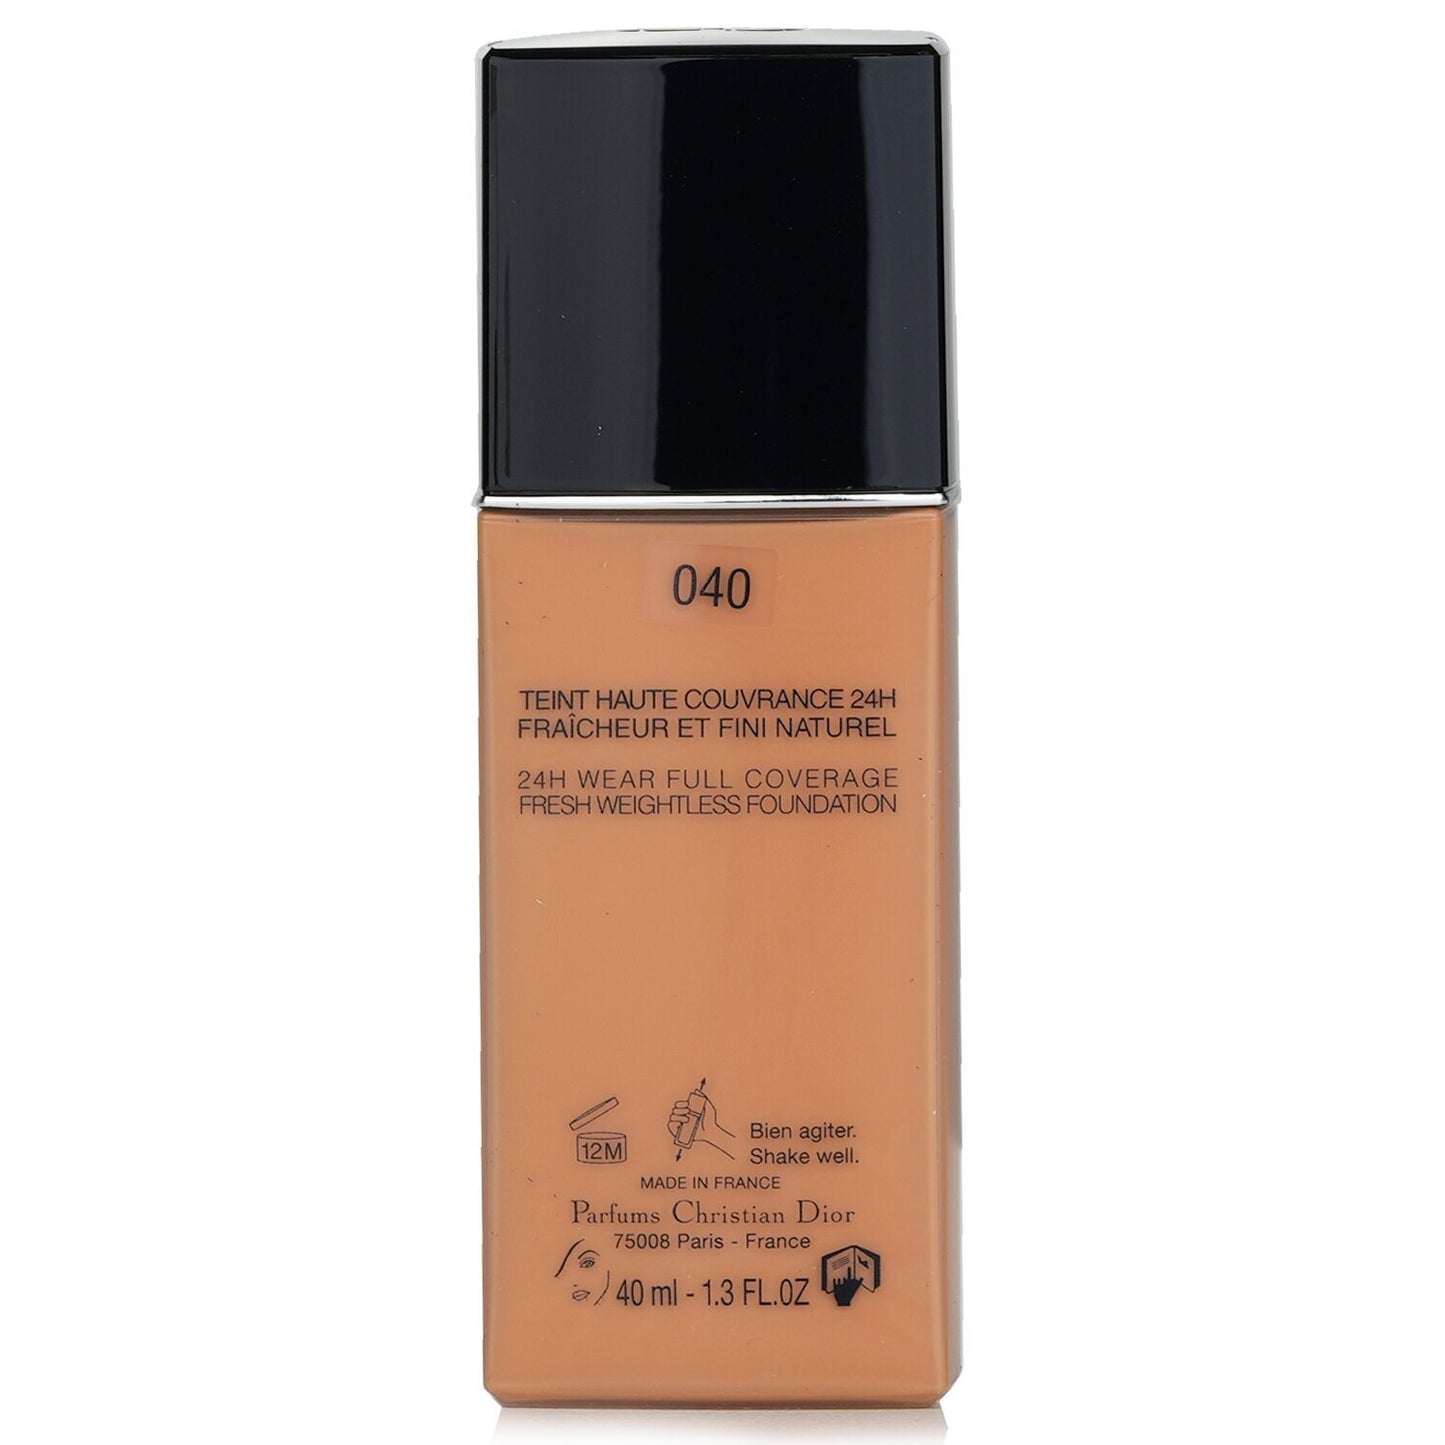 CHRISTIAN DIOR - Diorskin Forever Undercover 24H Wear Full Coverage Water Based Foundation - # 040 Honey Beige C000900040 / 383639 40ml/1.3oz - lolaluxeshop